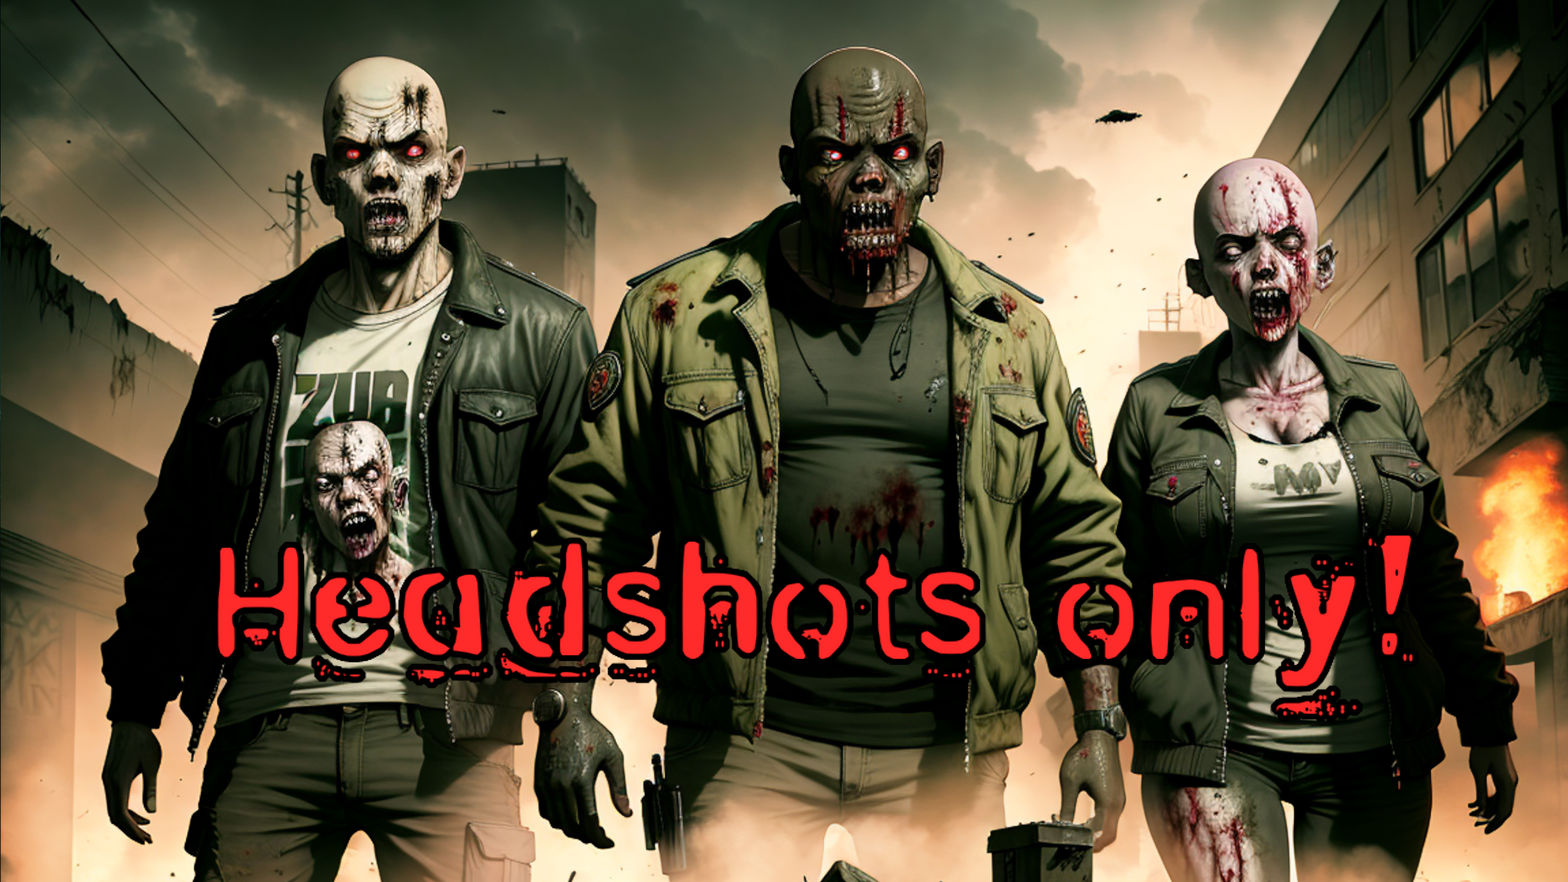 Headshots only!